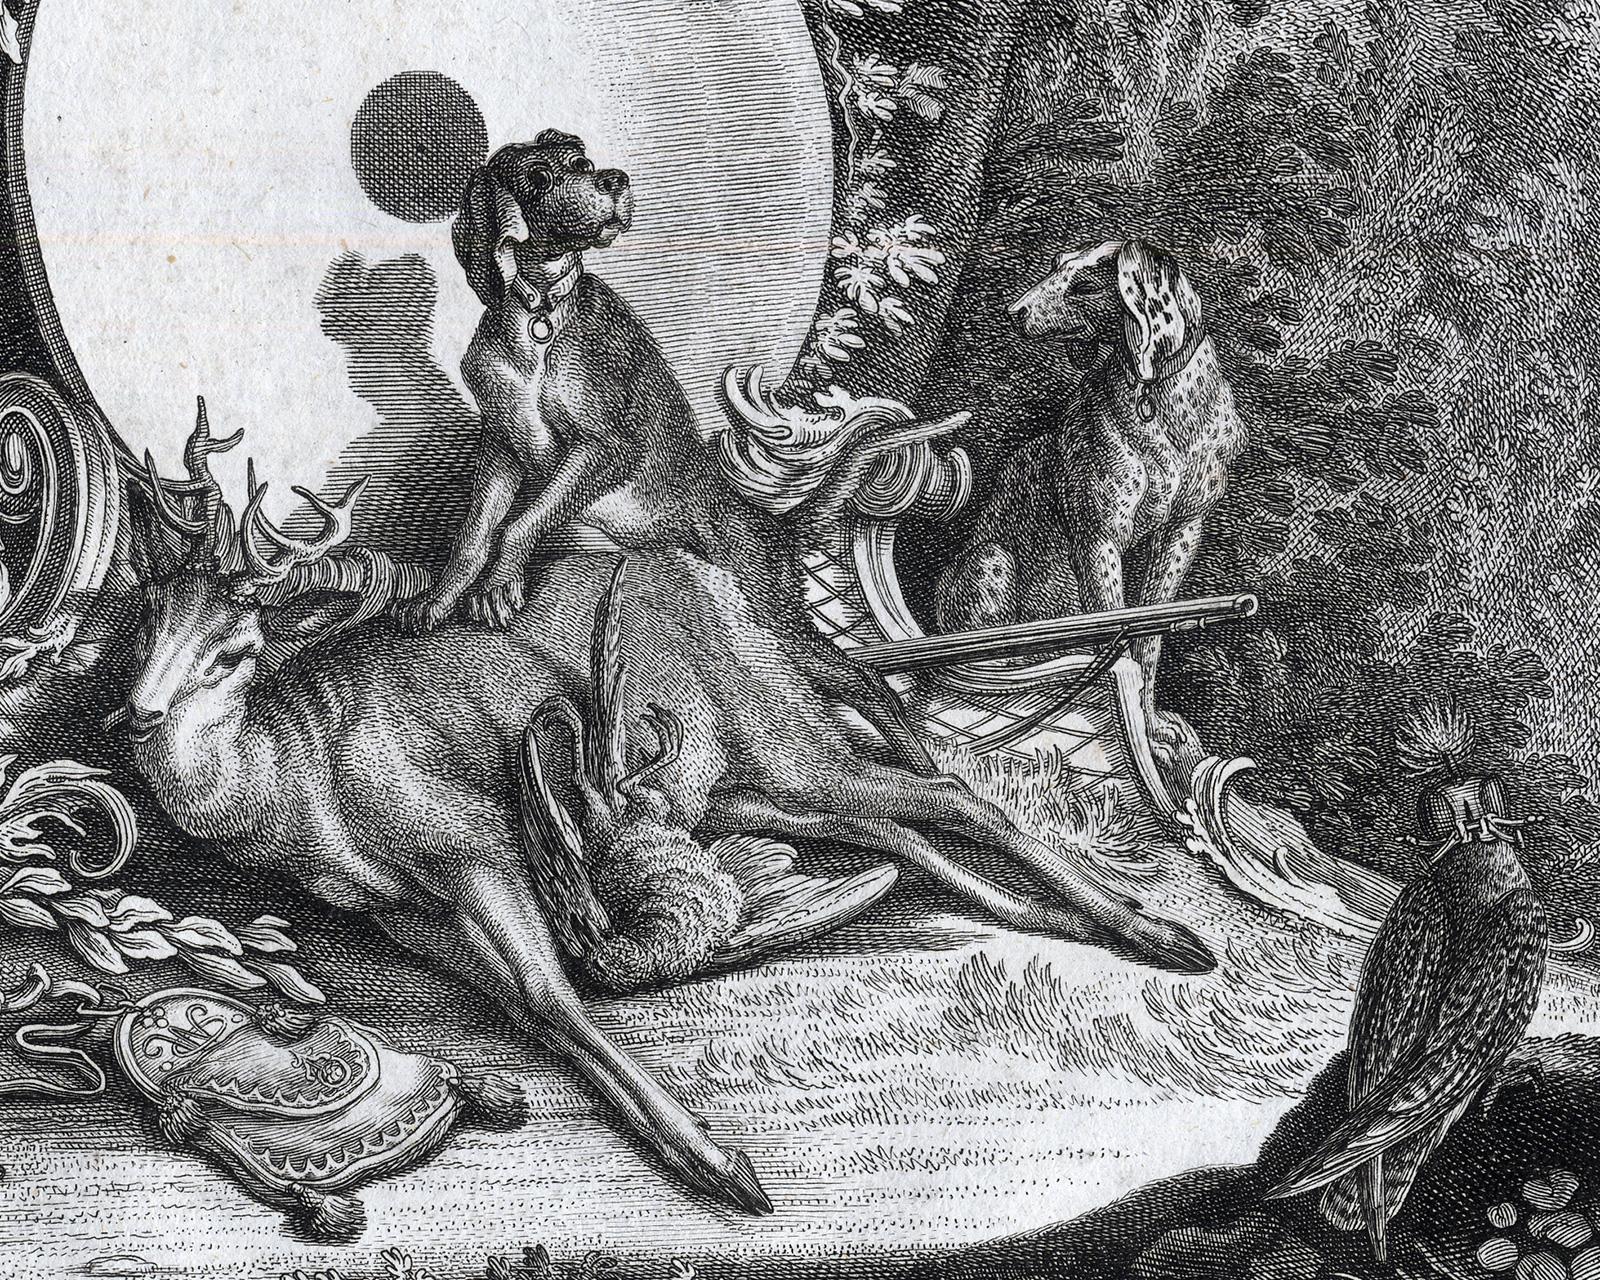 Antique print showing Selene and a hunting dog by Ridinger - Engraving - 18th c - Old Masters Print by Martin Elias Ridinger